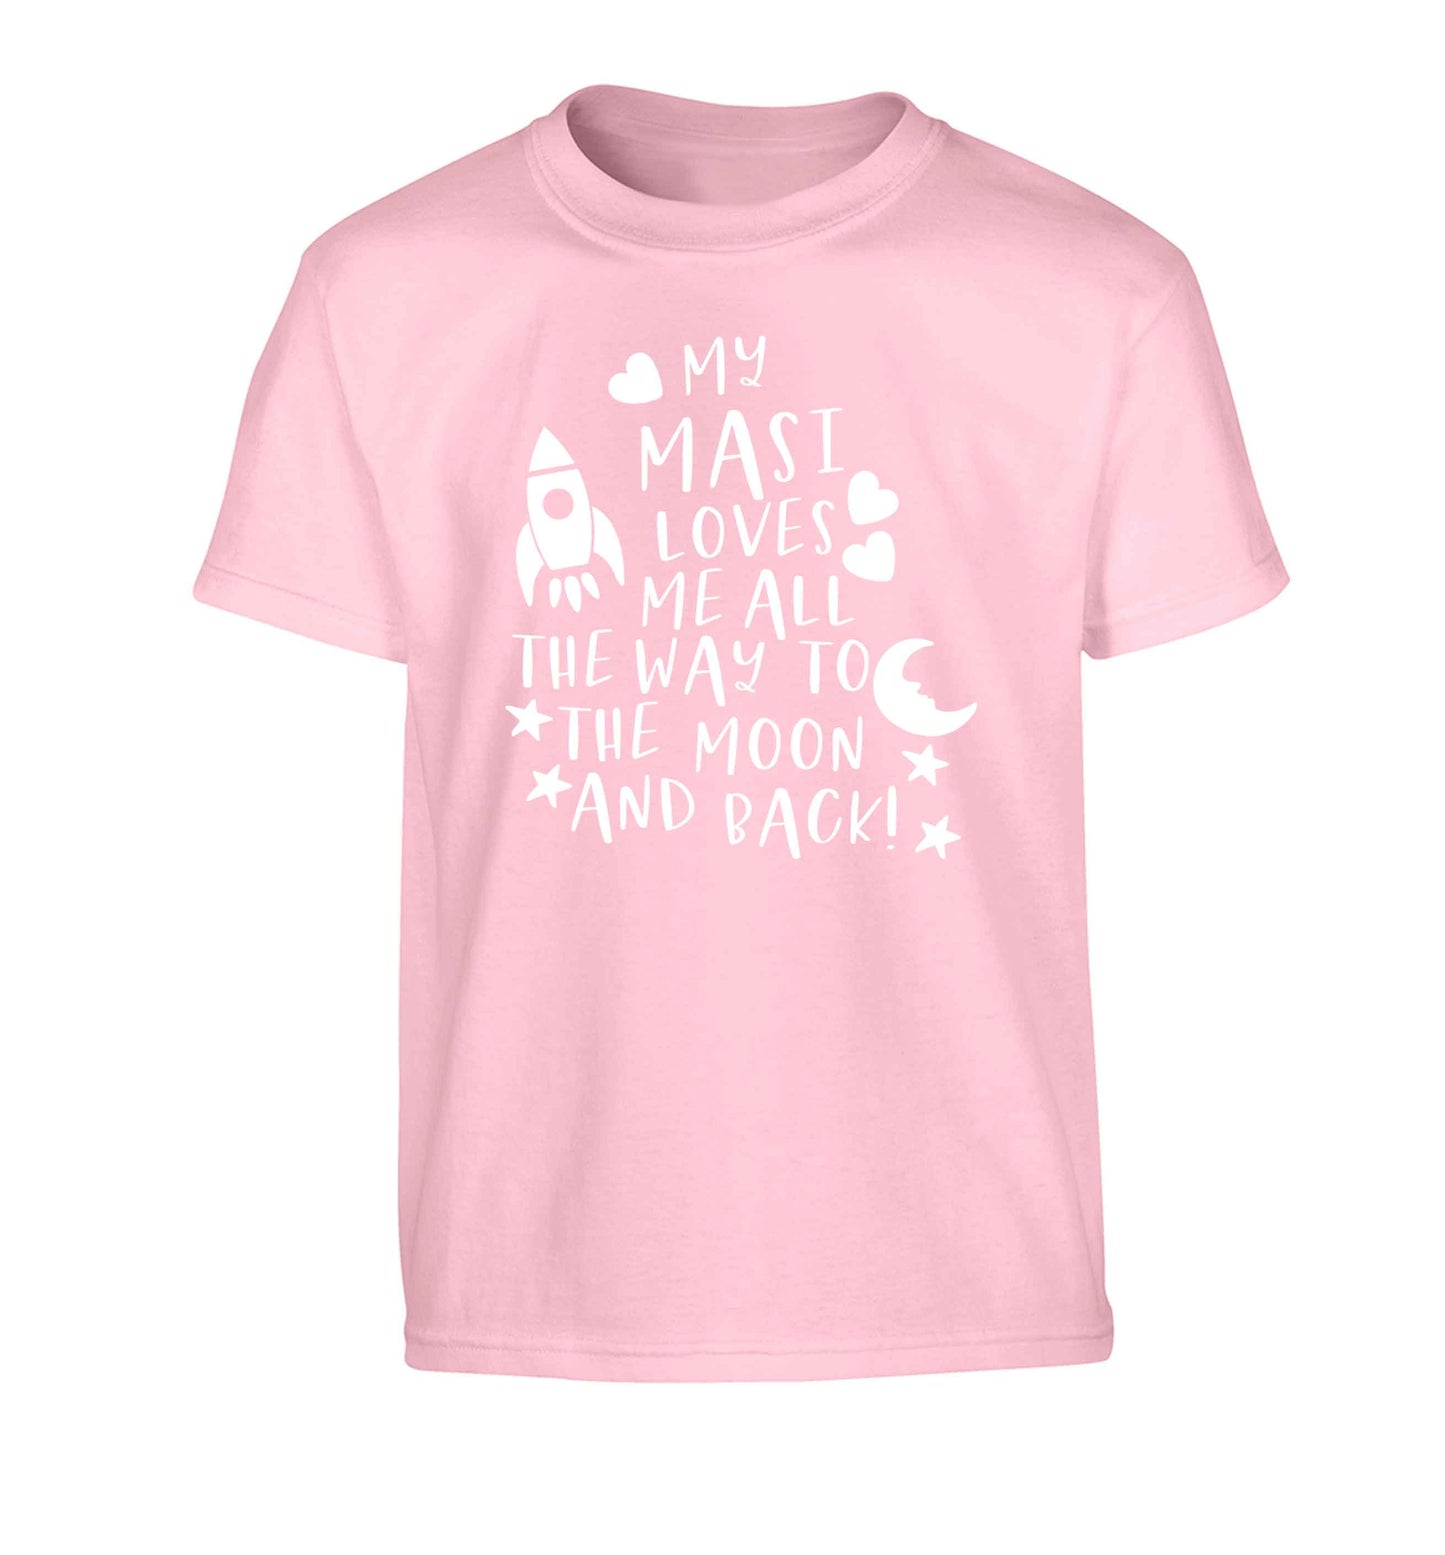 My masi loves me all the way to the moon and back Children's light pink Tshirt 12-13 Years